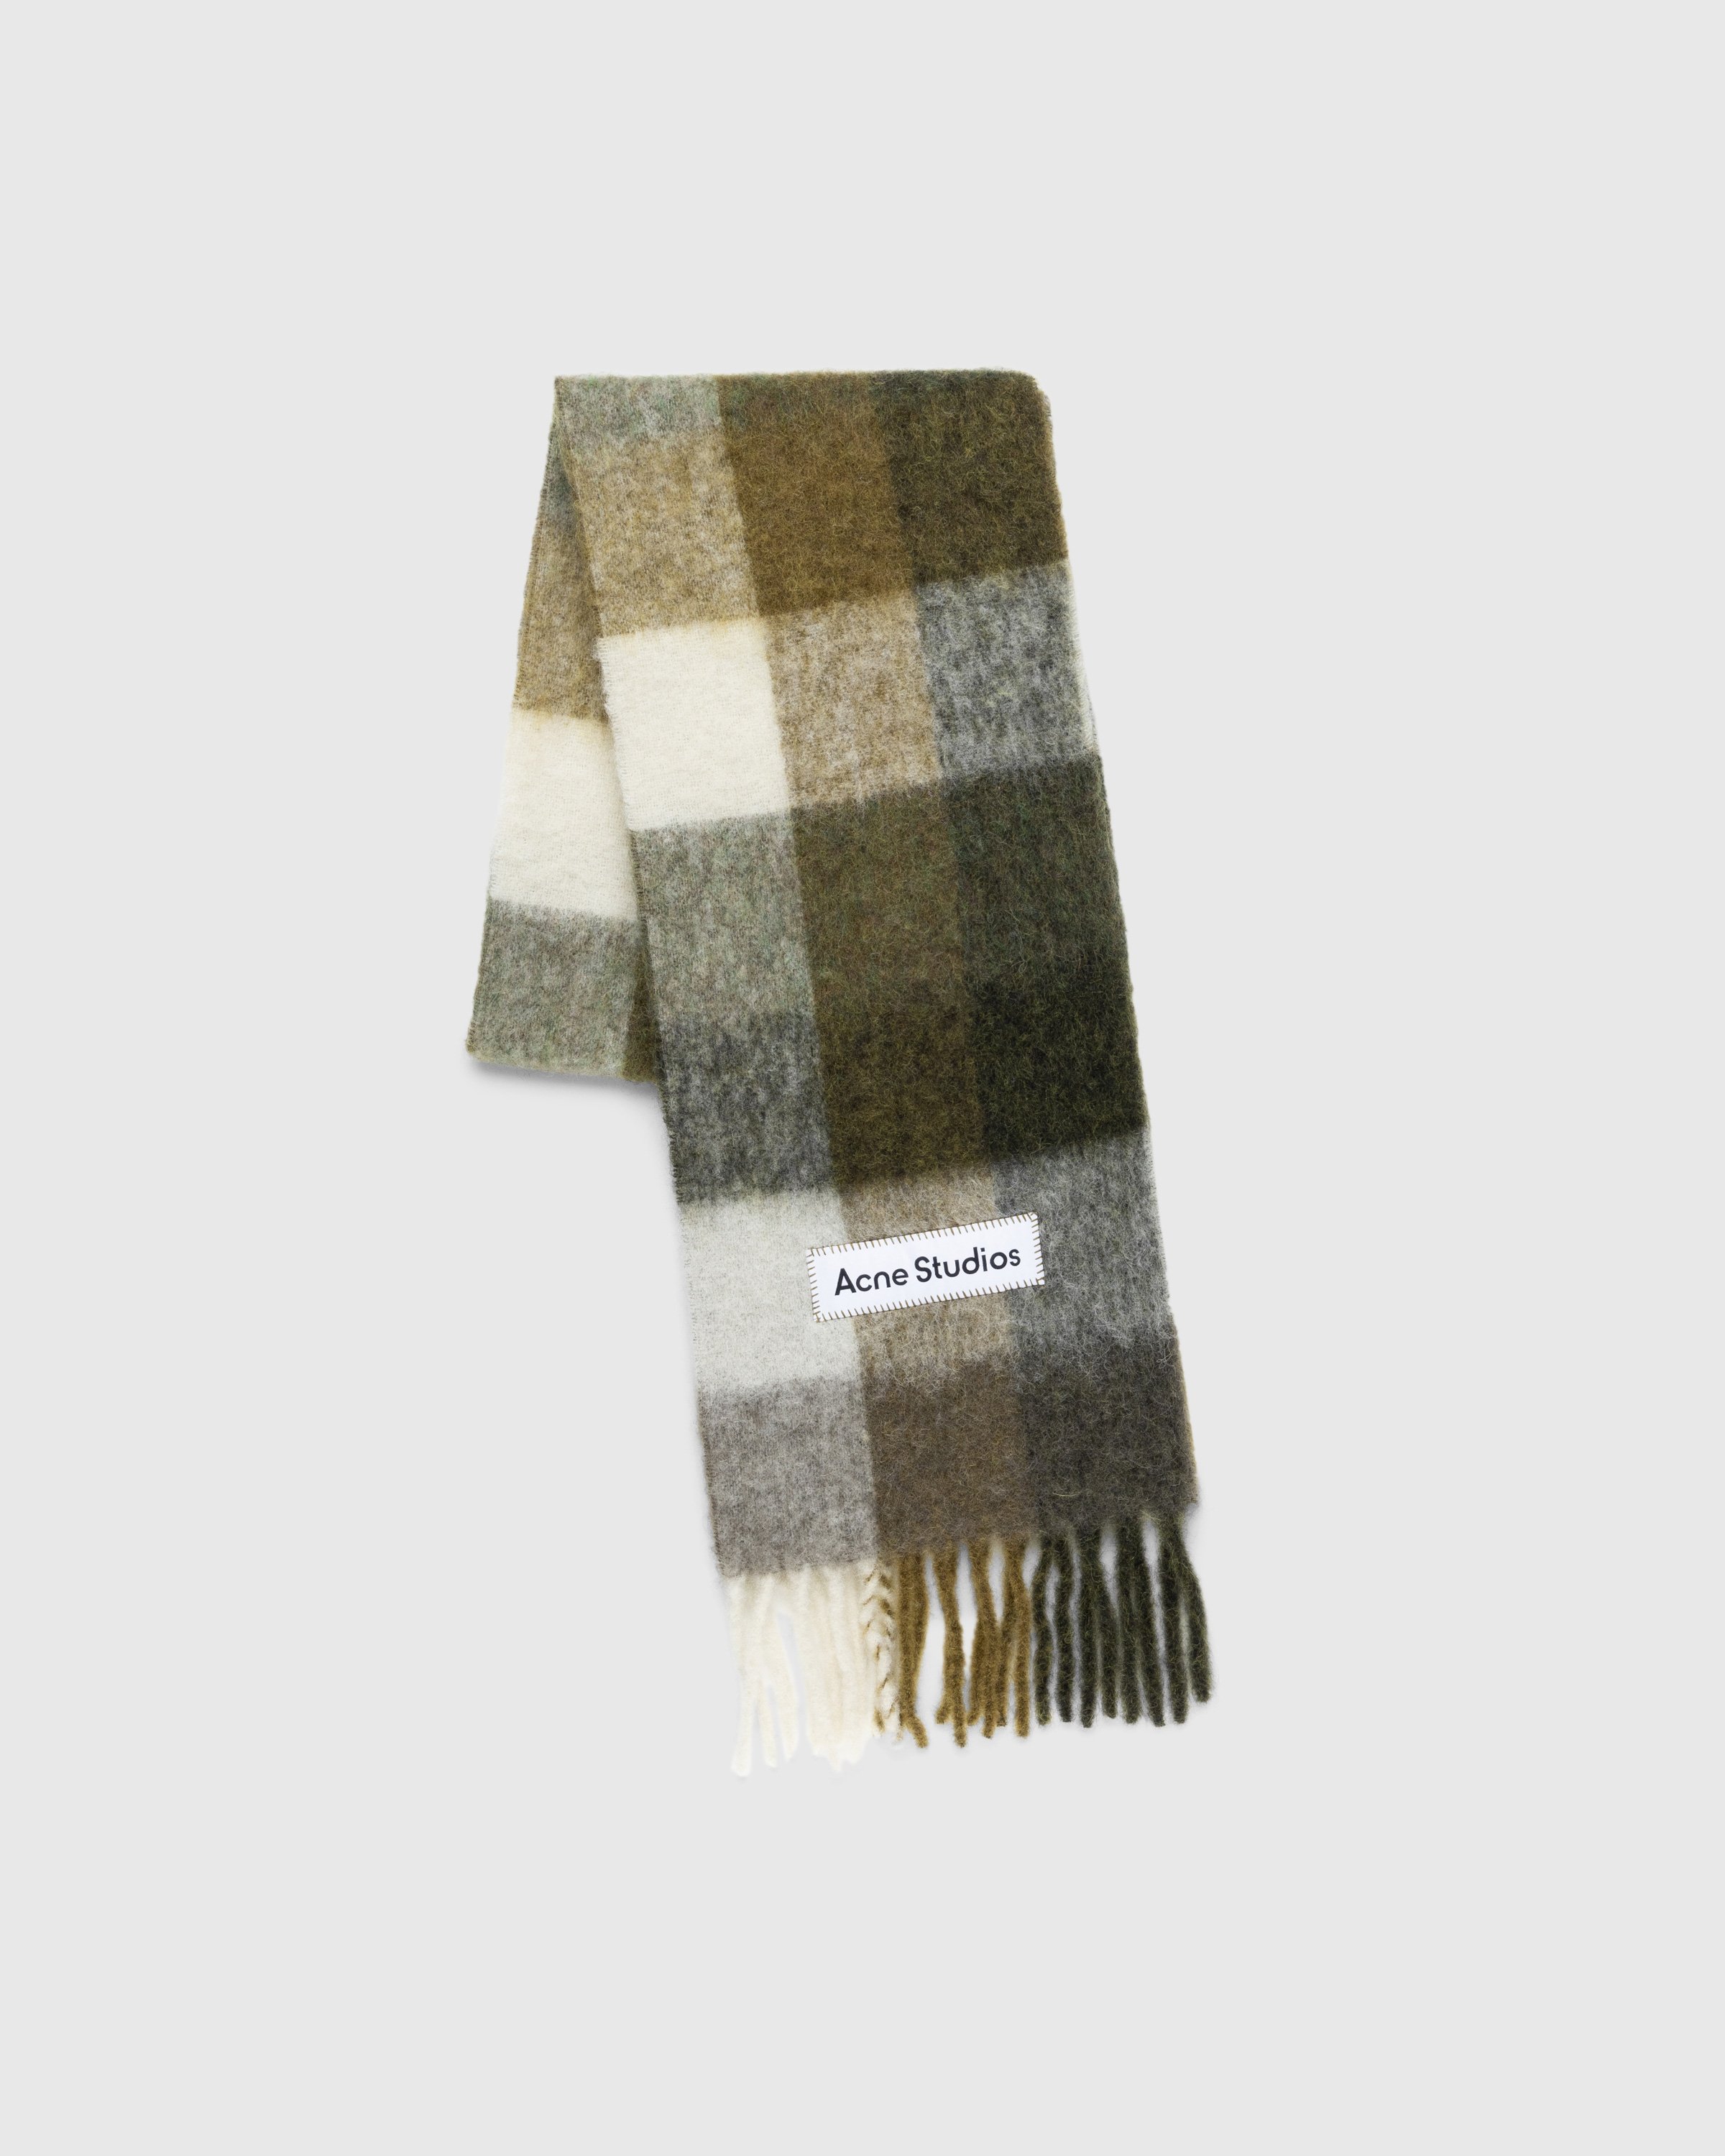 Acne Studios - Mohair Checked Scarf Taupe/Green/Black - Accessories - Multi - Image 2